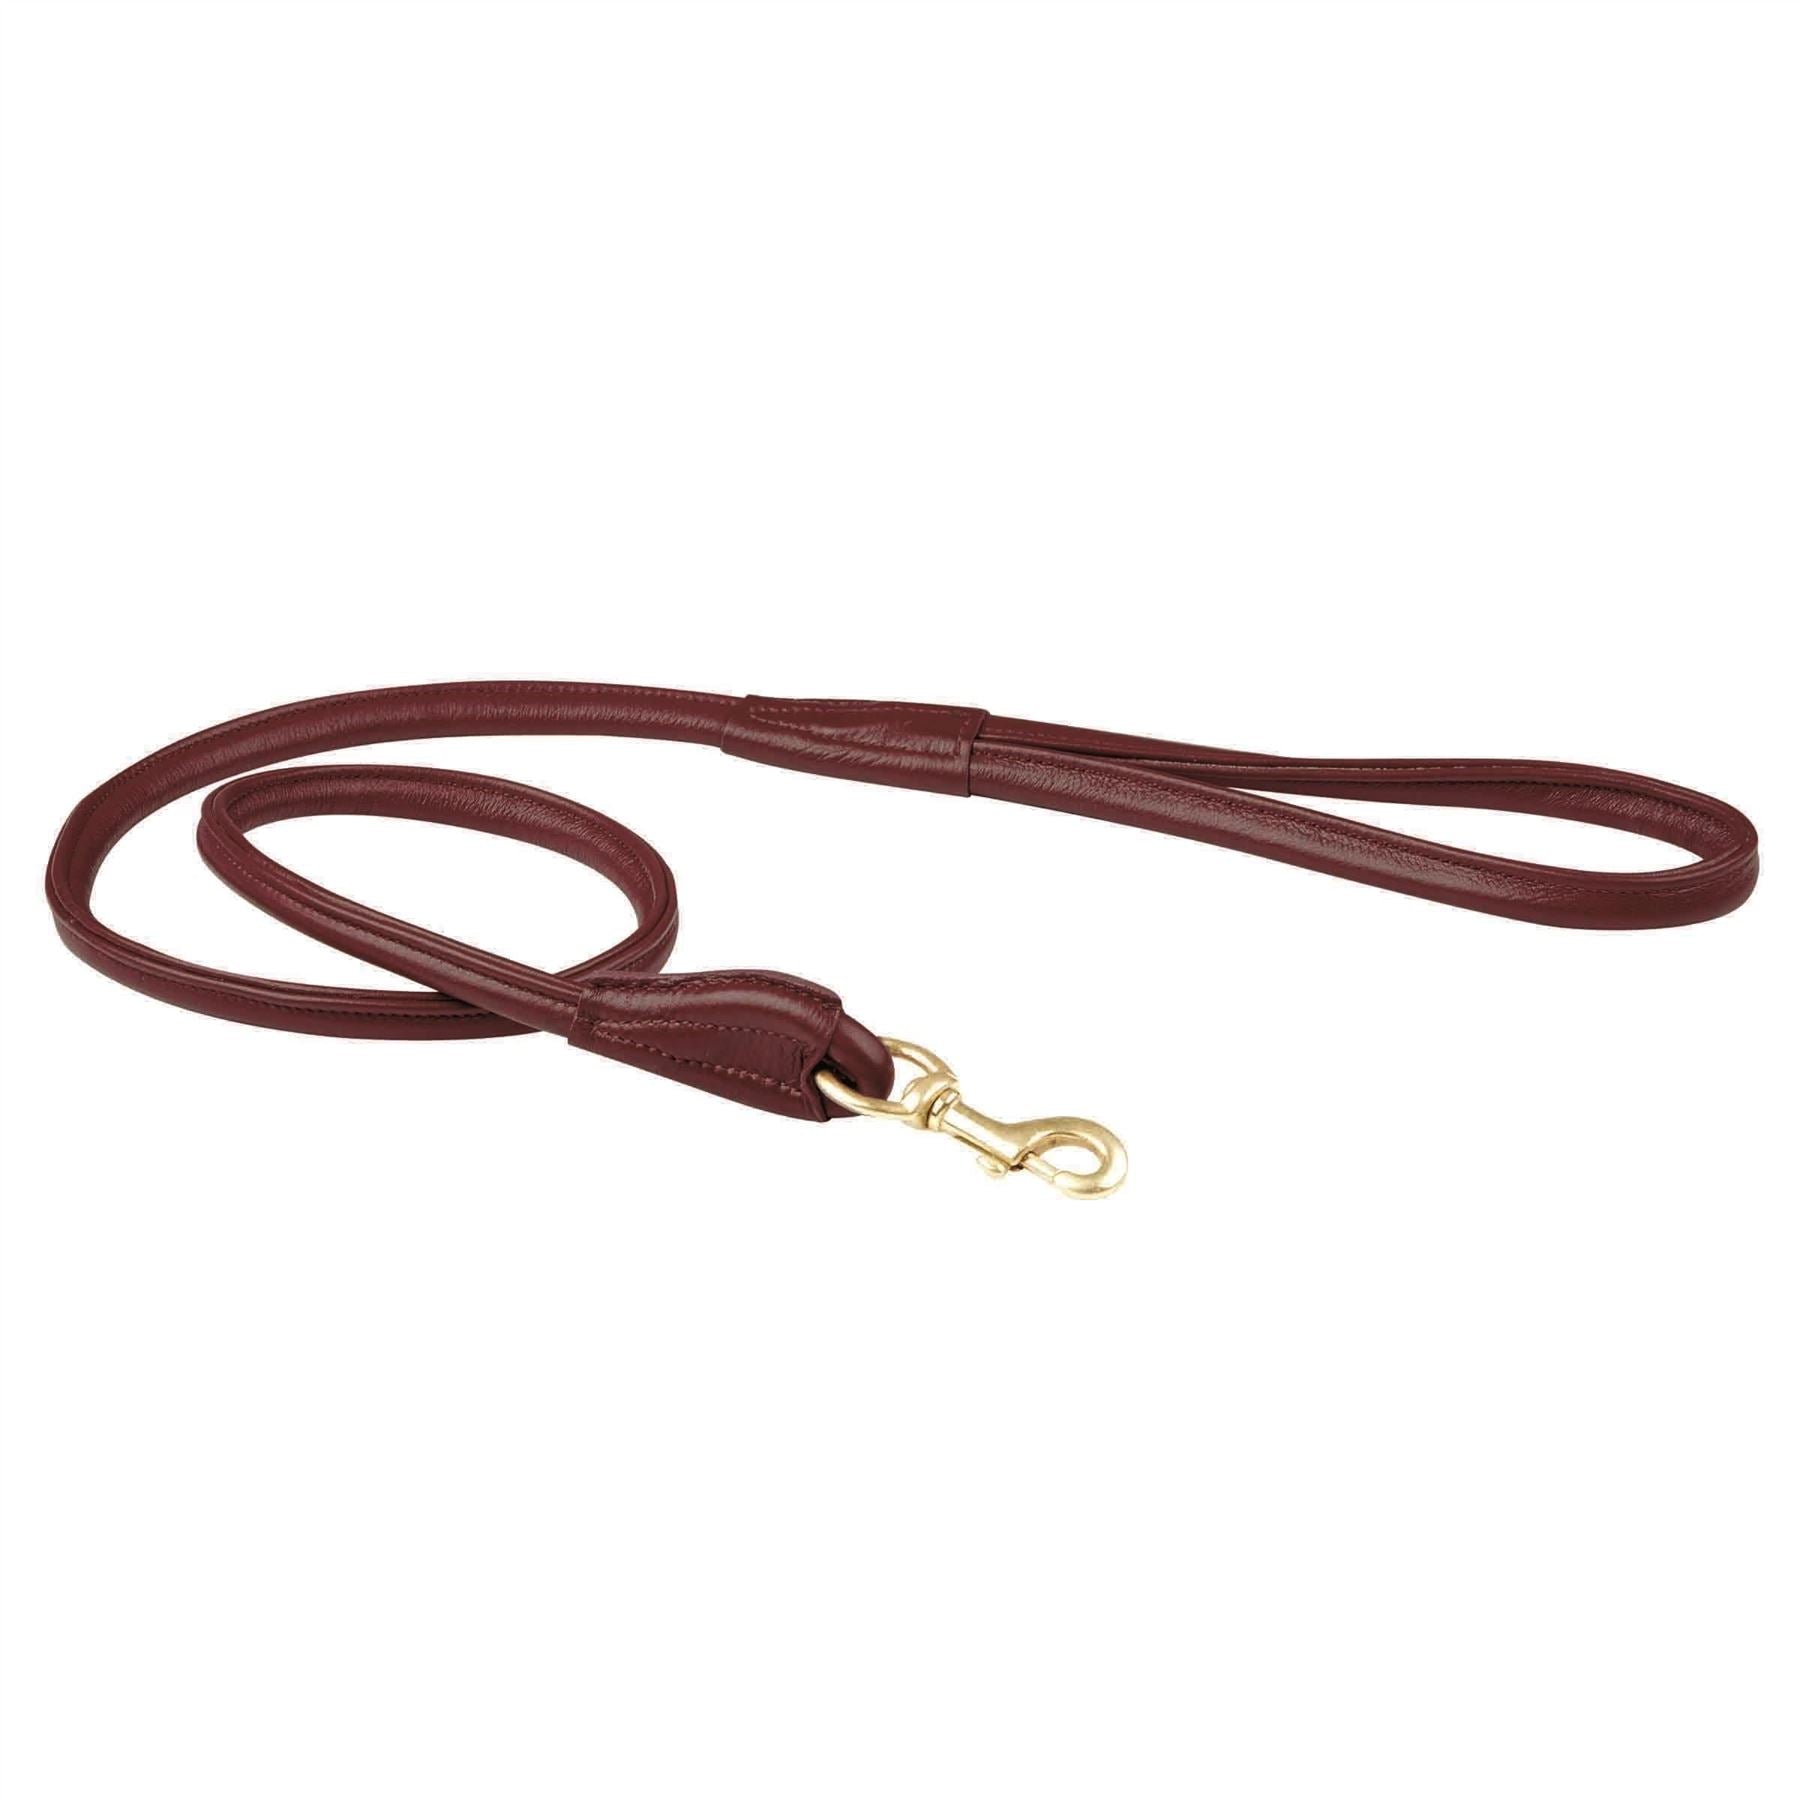 Weatherbeeta Rolled Leather Dog Lead - Just Horse Riders